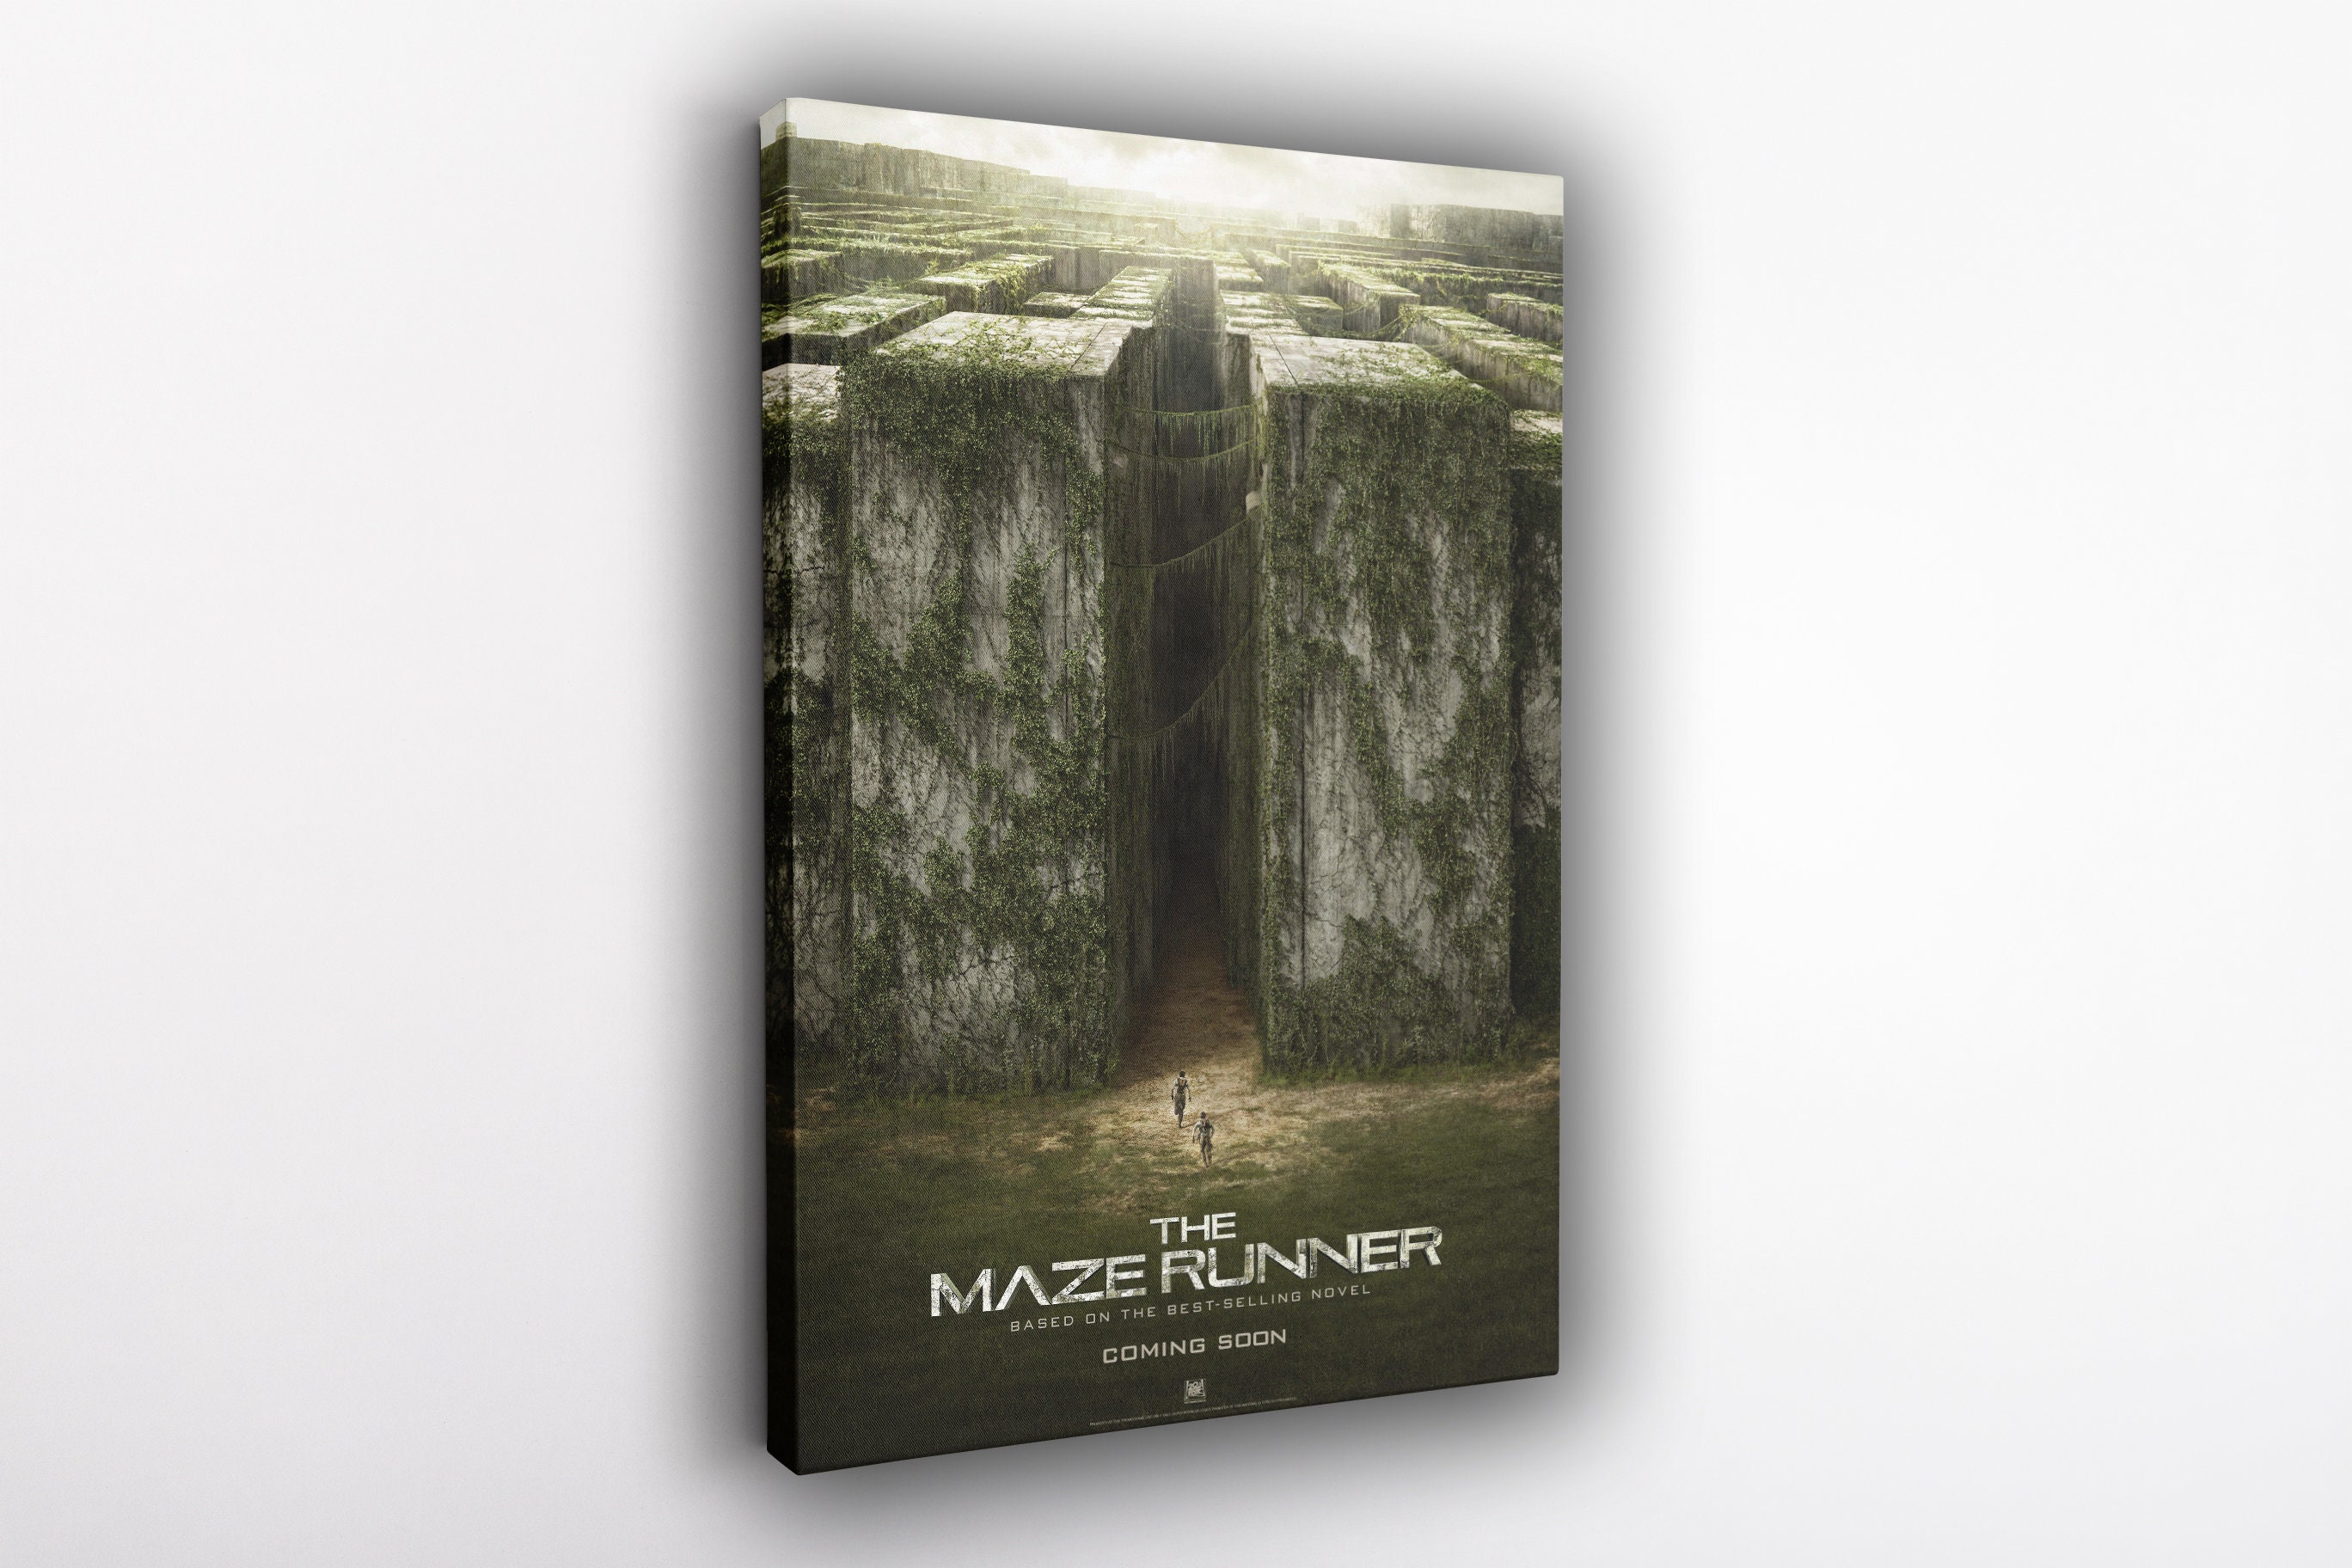 158490 The Maze Runner Dylan Thomas thrilling Hot Movie Wall Print Poster